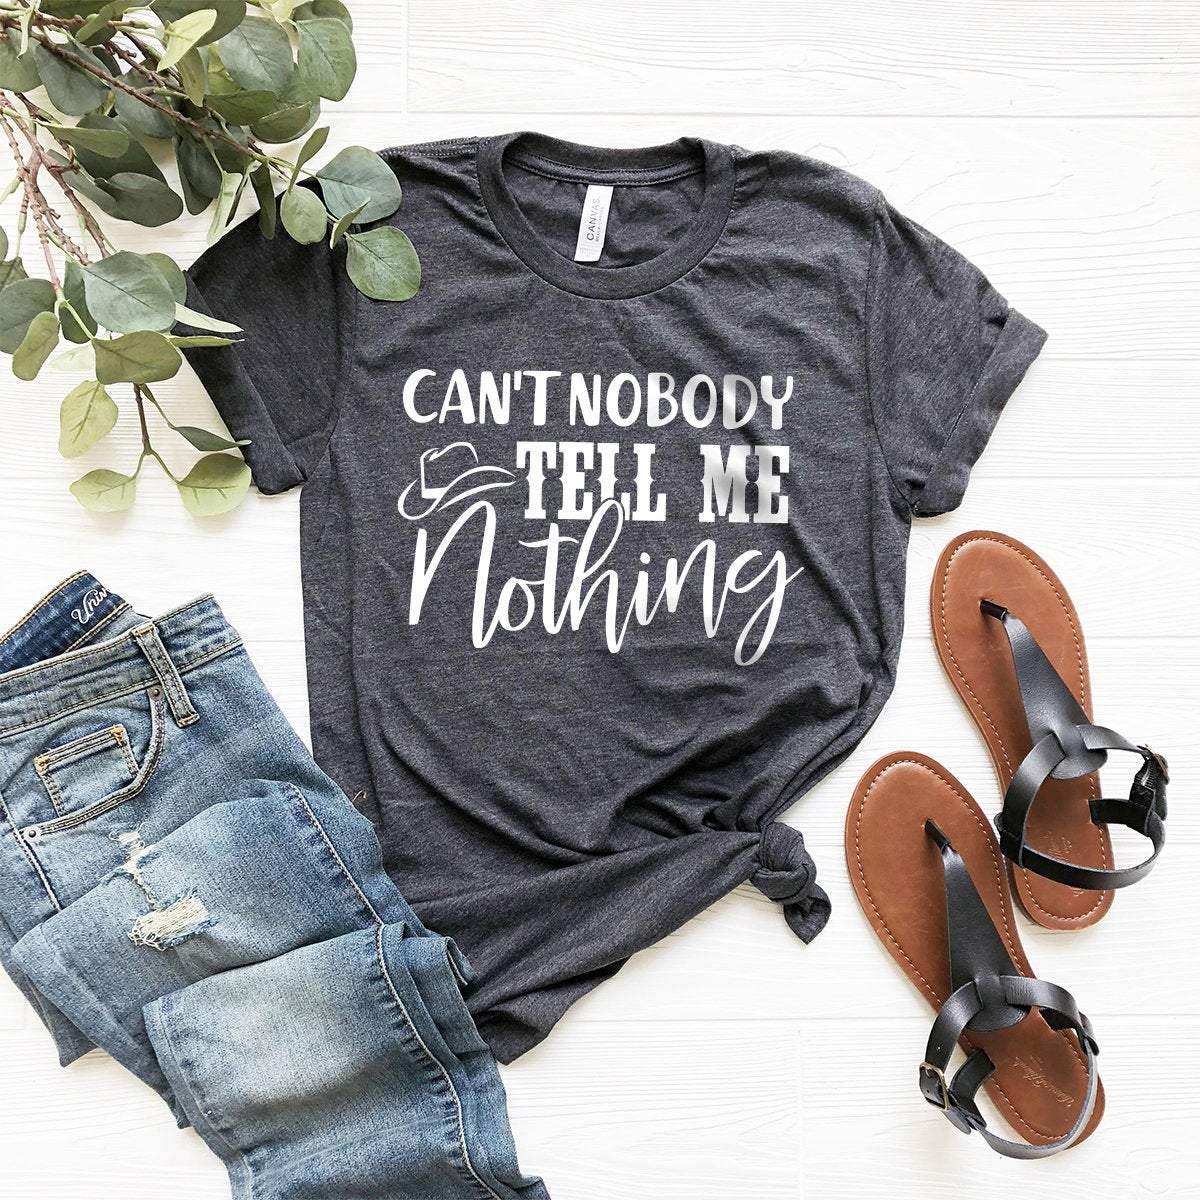 Western Women Shirt, Country Shirt, Southern Graphic Tee, Western Graphic Tee, Can't Nobody Tell Me Nothing Shirt, Country Song Shirt - Fastdeliverytees.com